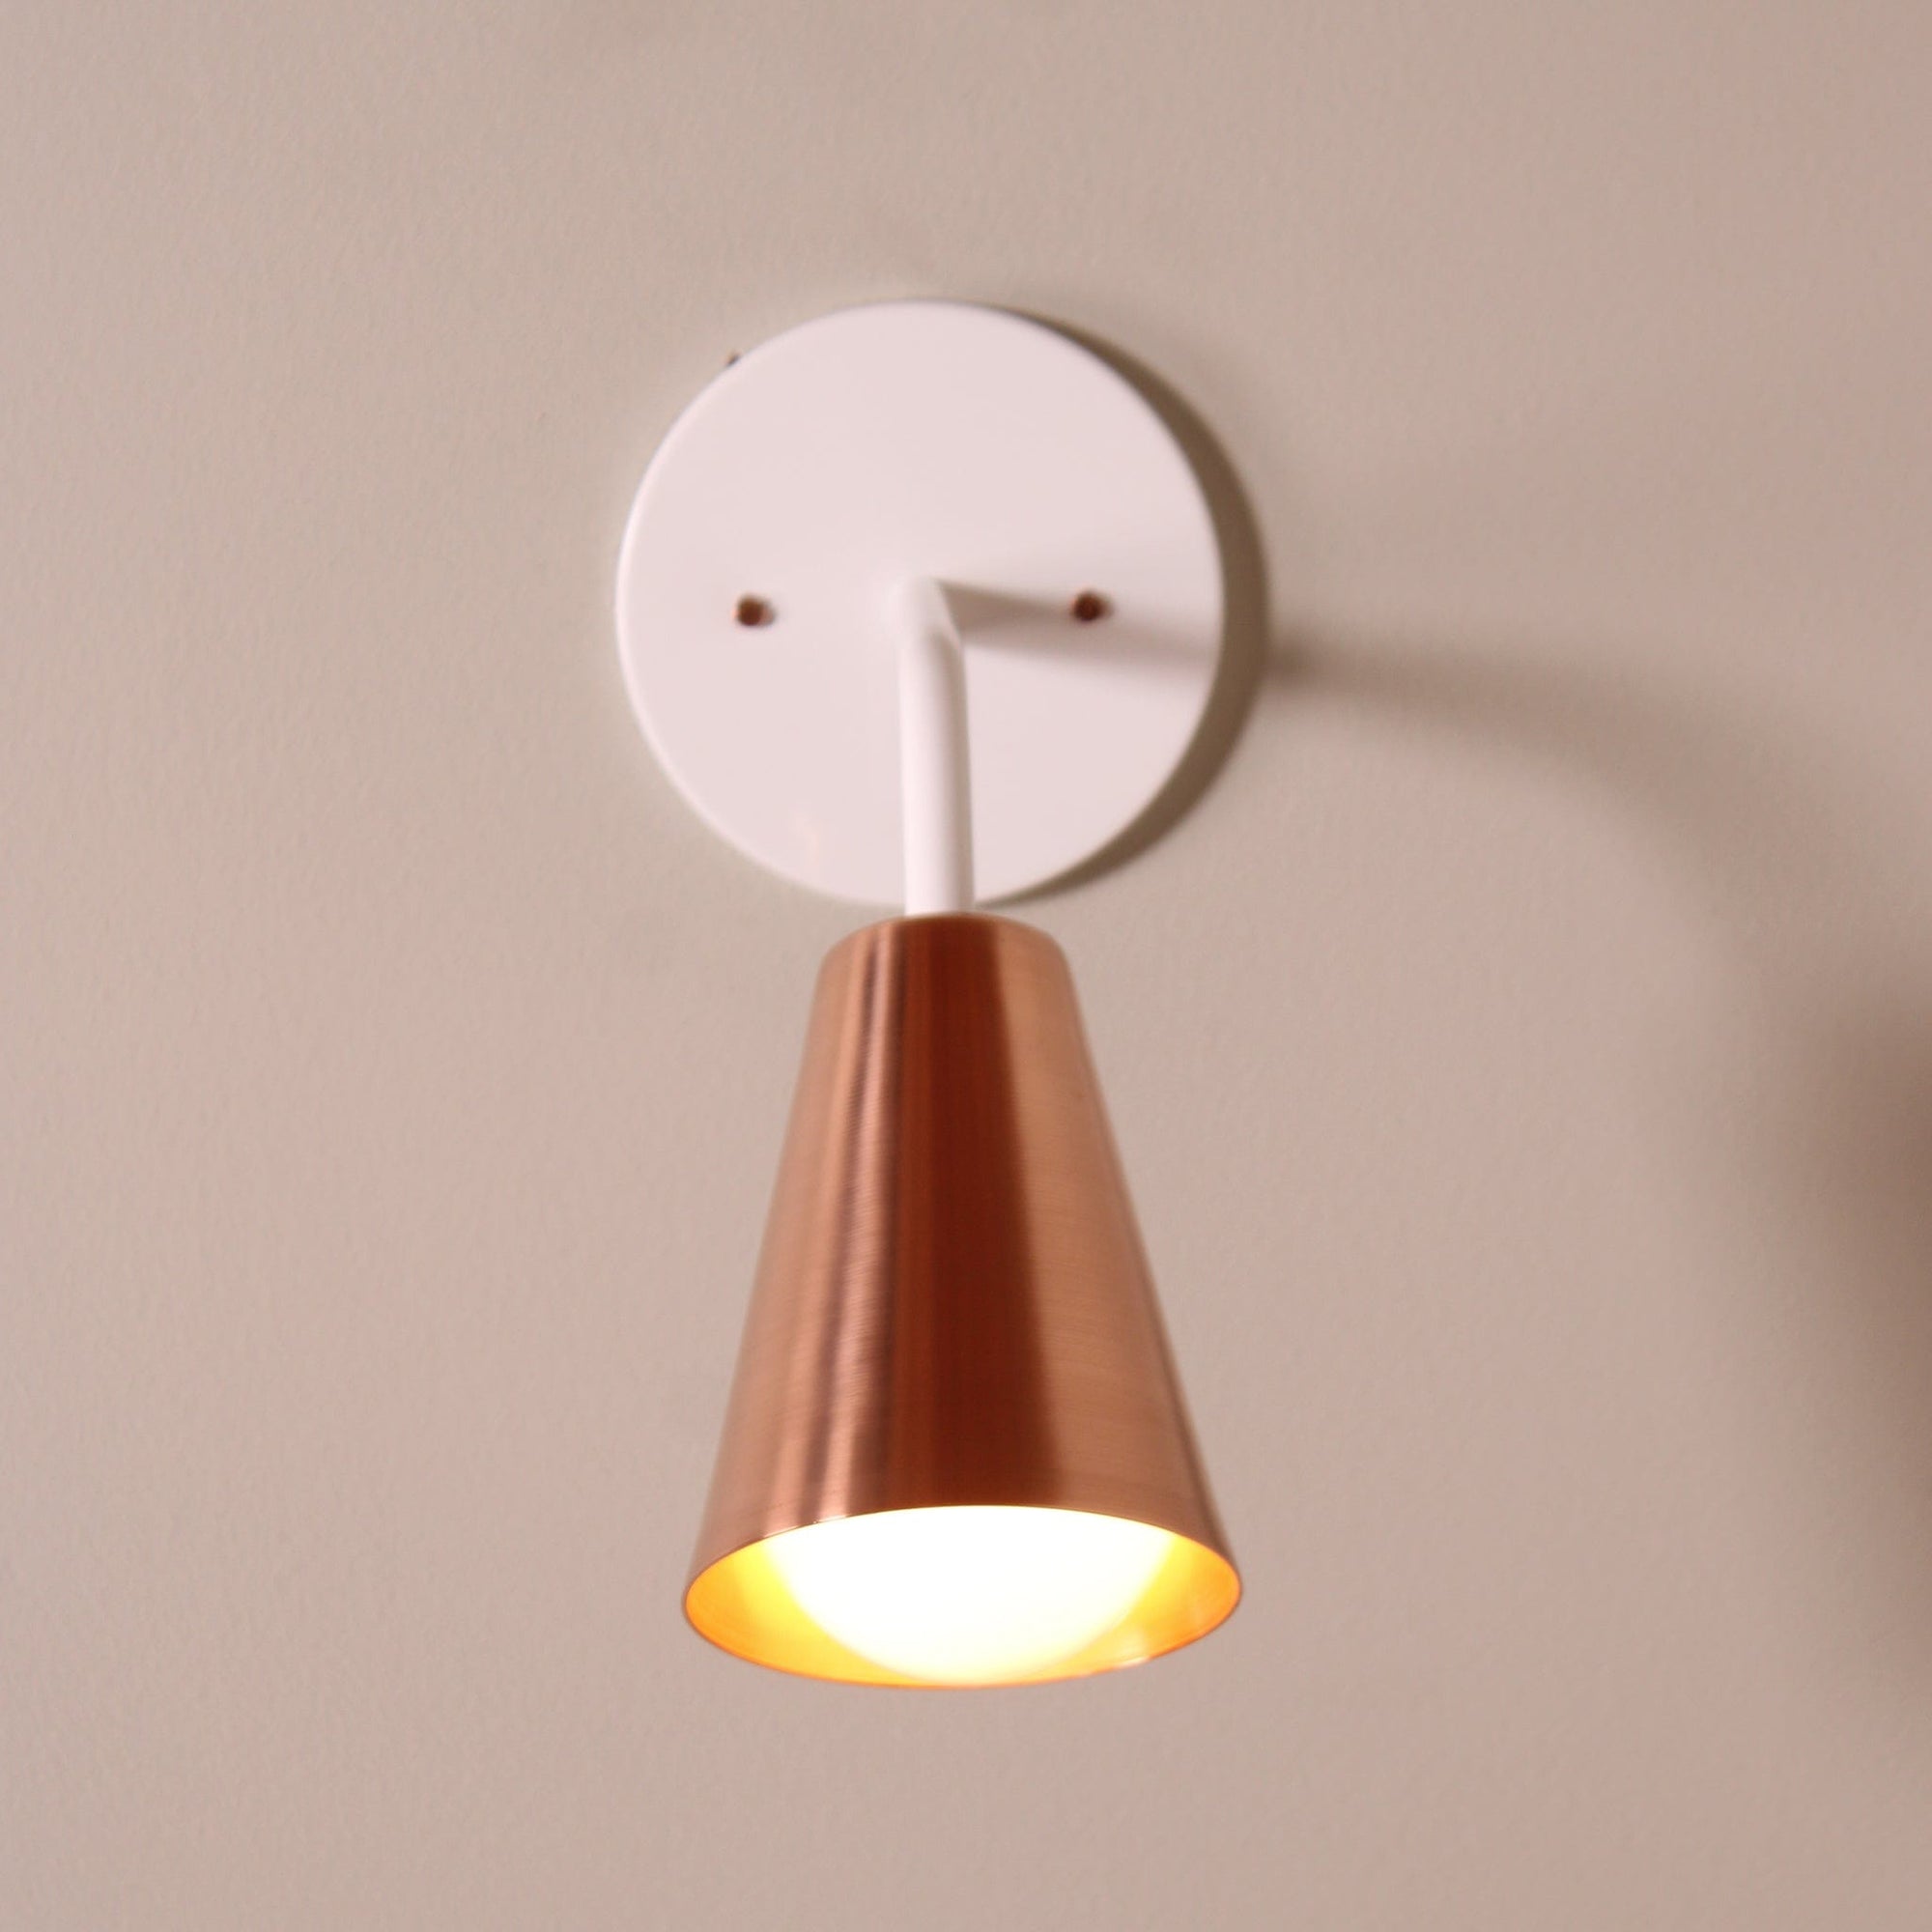 Monte Carlo wall sconce White / Copper shade onefortythree